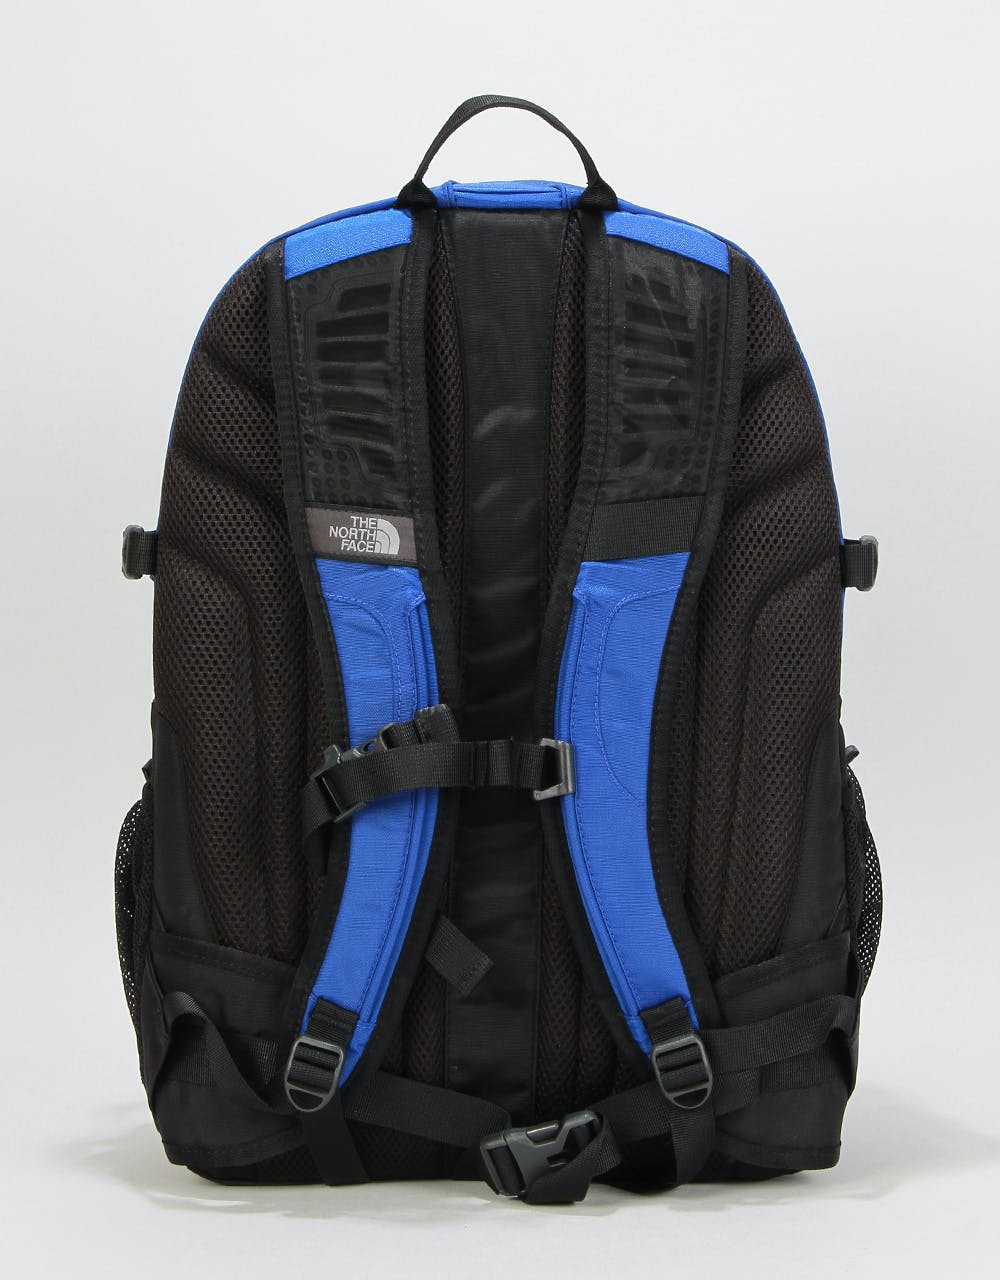 The North Face Borealis Classic Backpack - TNF Blue/TNF Black